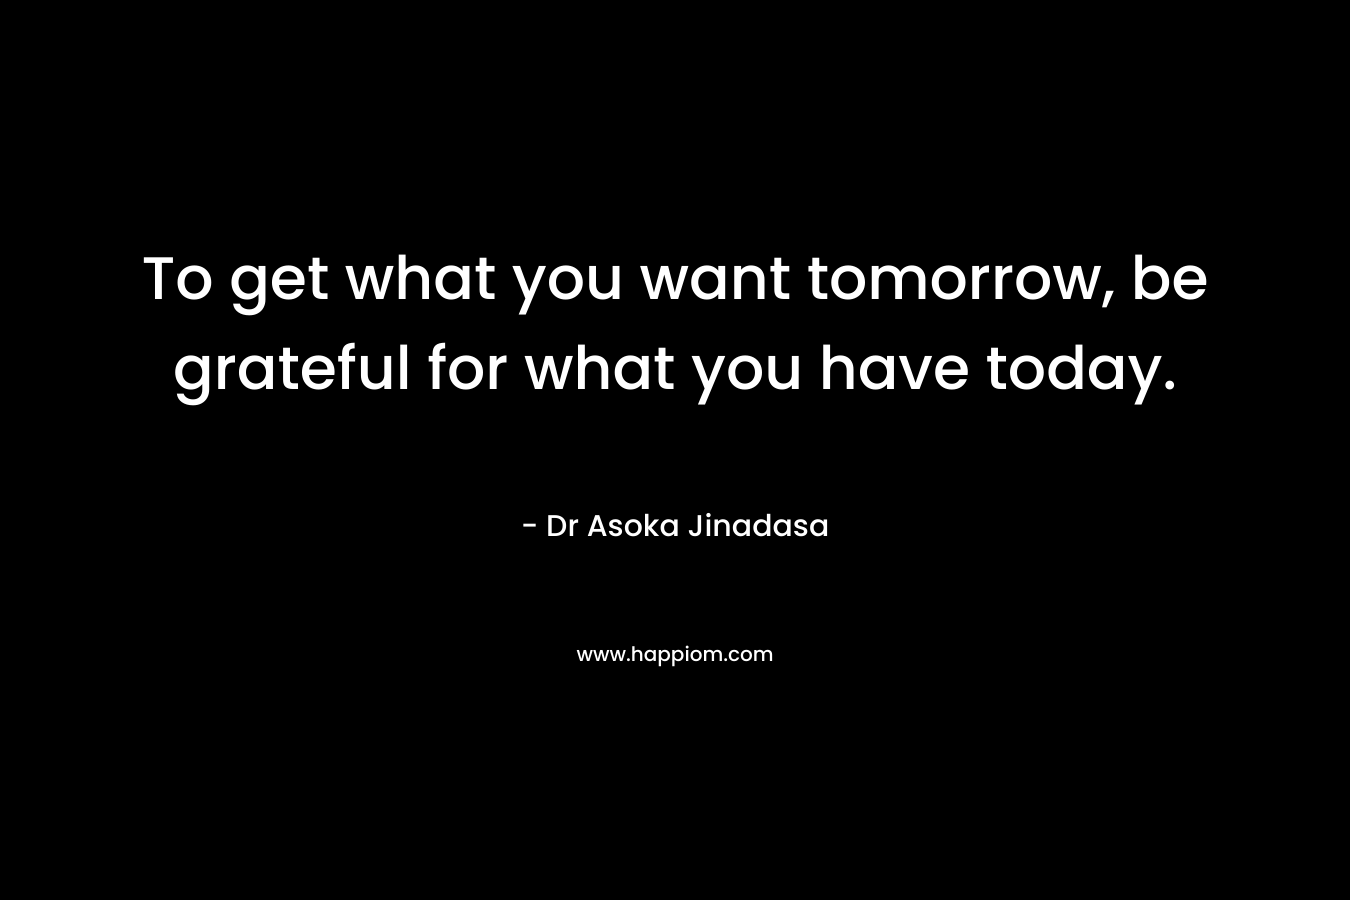 To get what you want tomorrow, be grateful for what you have today. – Dr Asoka Jinadasa